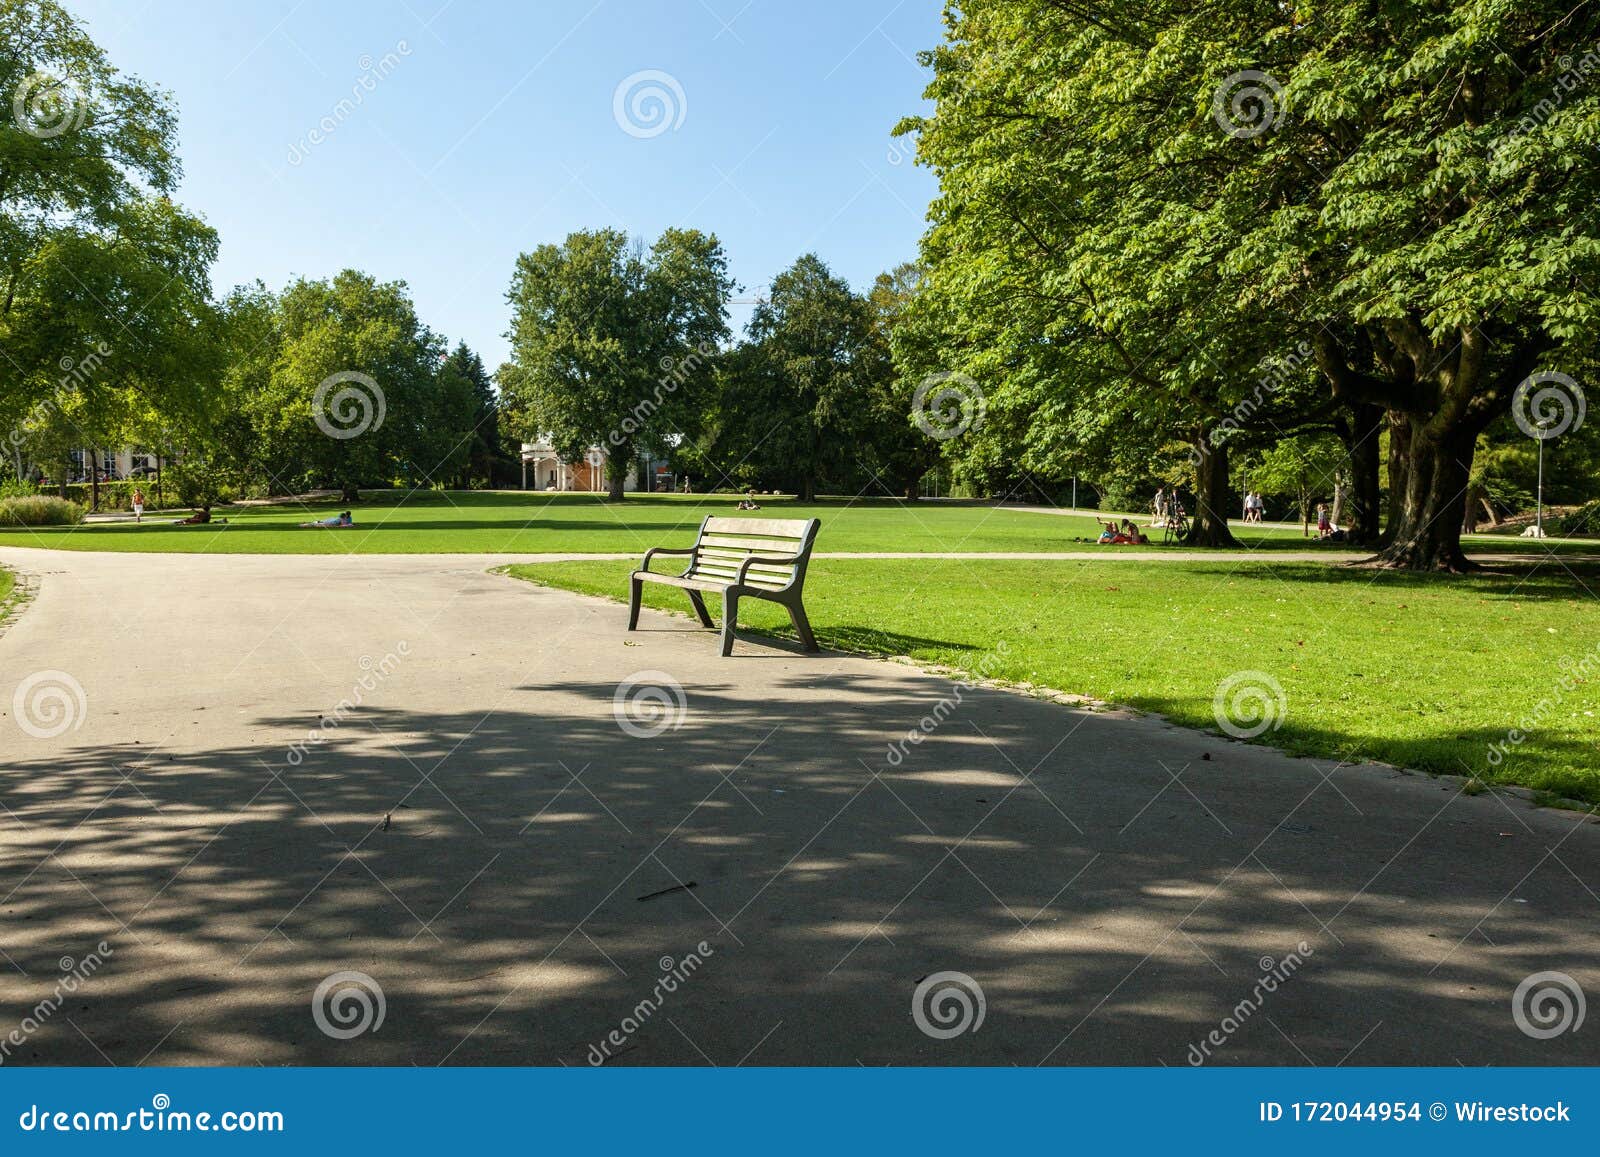 Long Shot Wooden Bench Along a Path in a Park Surrounded by Trees in ...